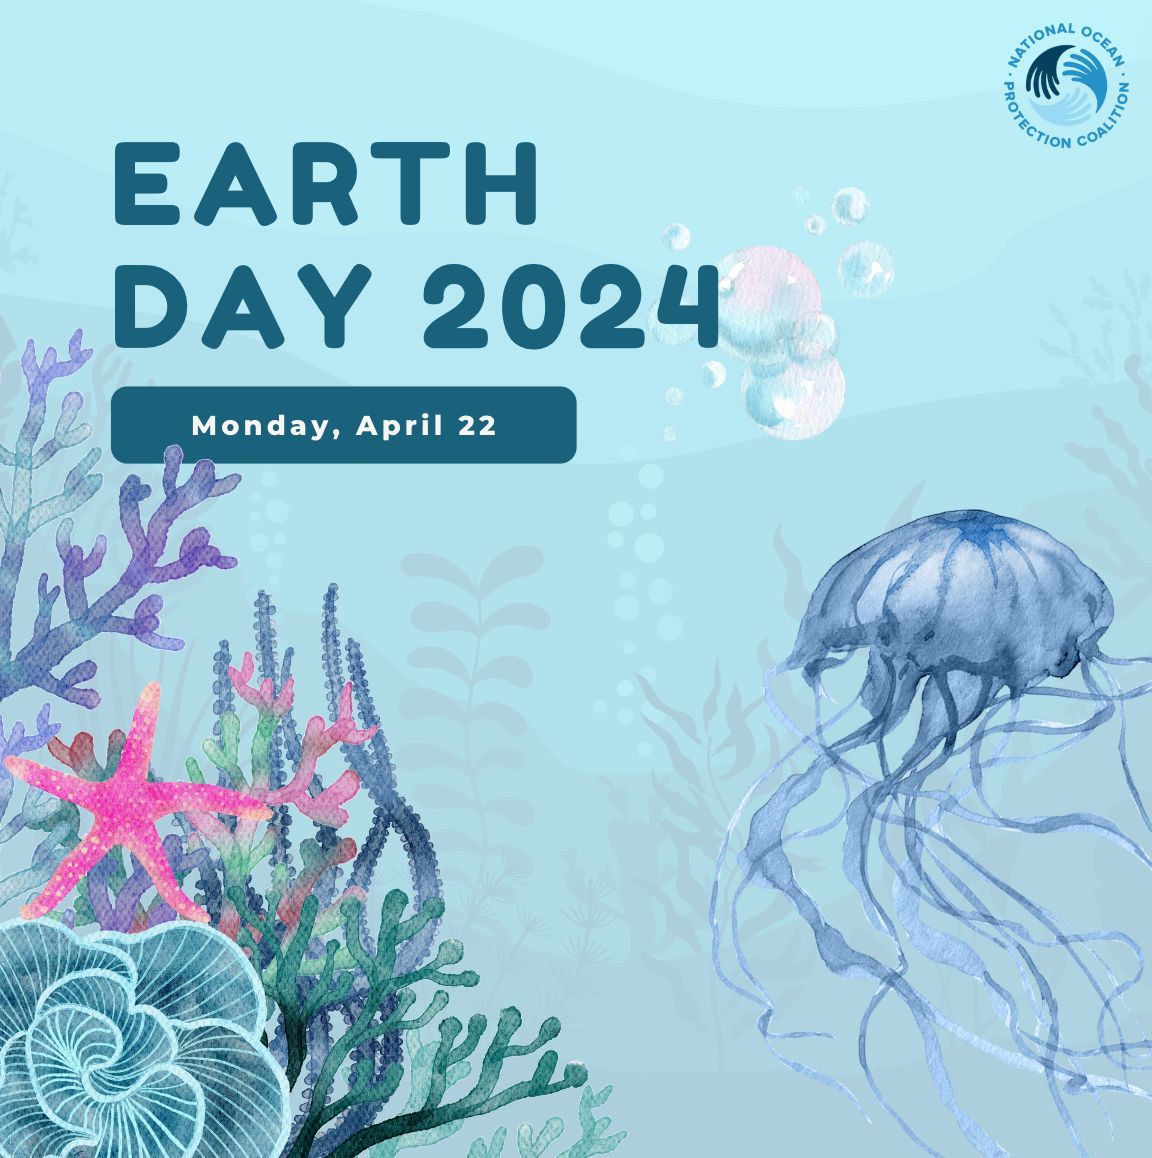 Happy #EarthDay! Let’s raise our ambition to protect our world and our future together. By preserving the natural areas that provide our food, clean water, and clean air we can buffer ourselves against the worst impacts of #ClimateChange and safeguard #NatureForAll. #Protect30x30